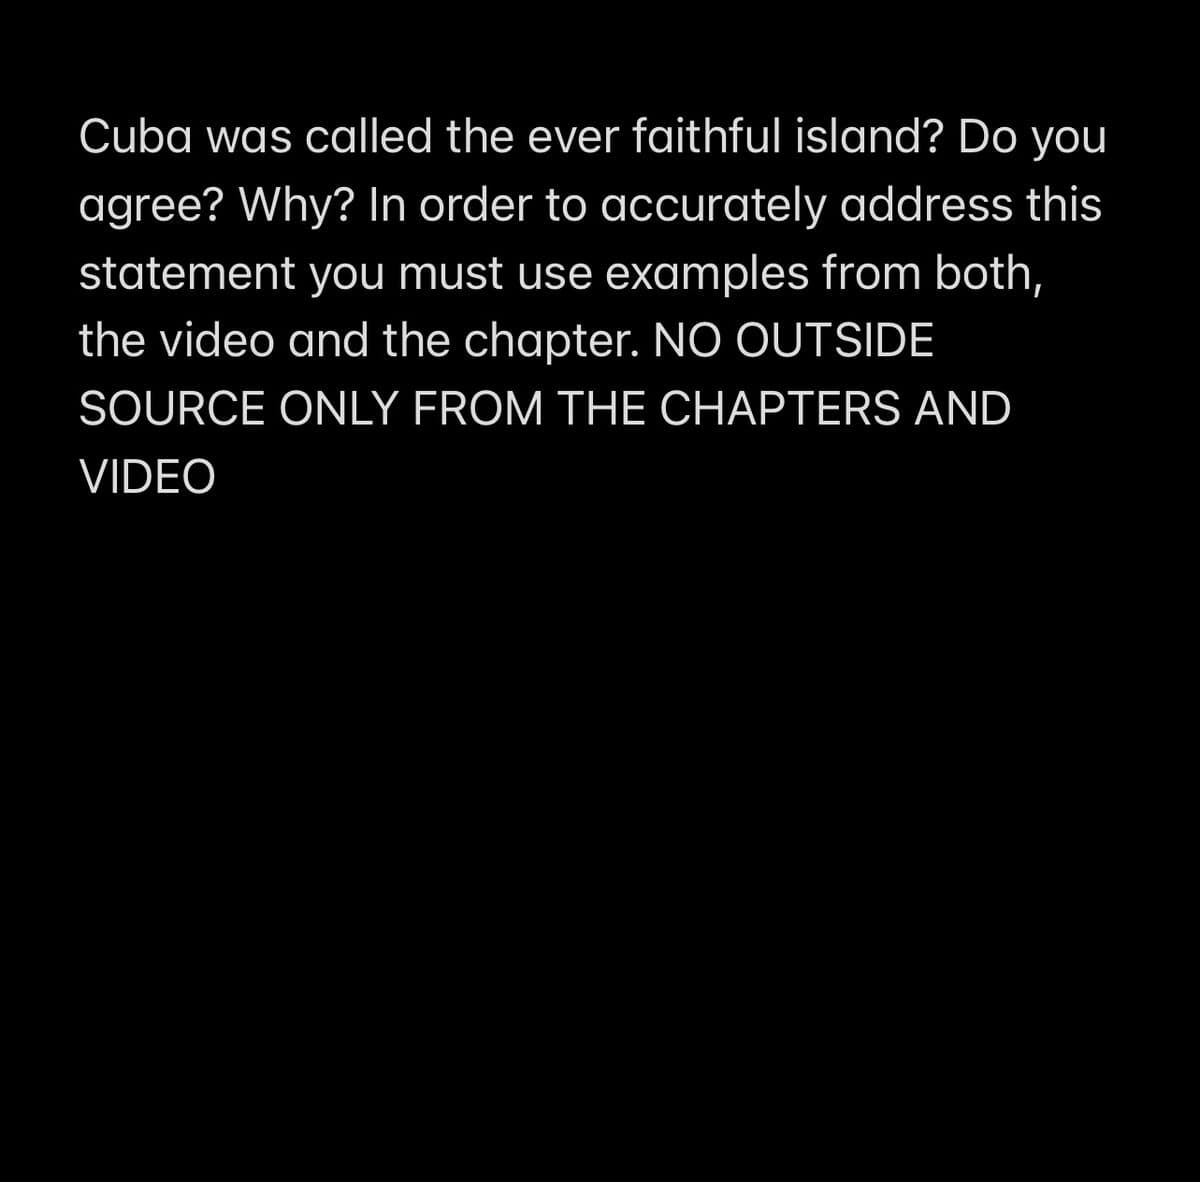 Cuba was called the ever faithful island? Do you
agree? Why? In order to accurately address this
statement you must use examples from both,
the video and the chapter. NO OUTSIDE
SOURCE ONLY FROM THE CHAPTERS AND
VIDEO